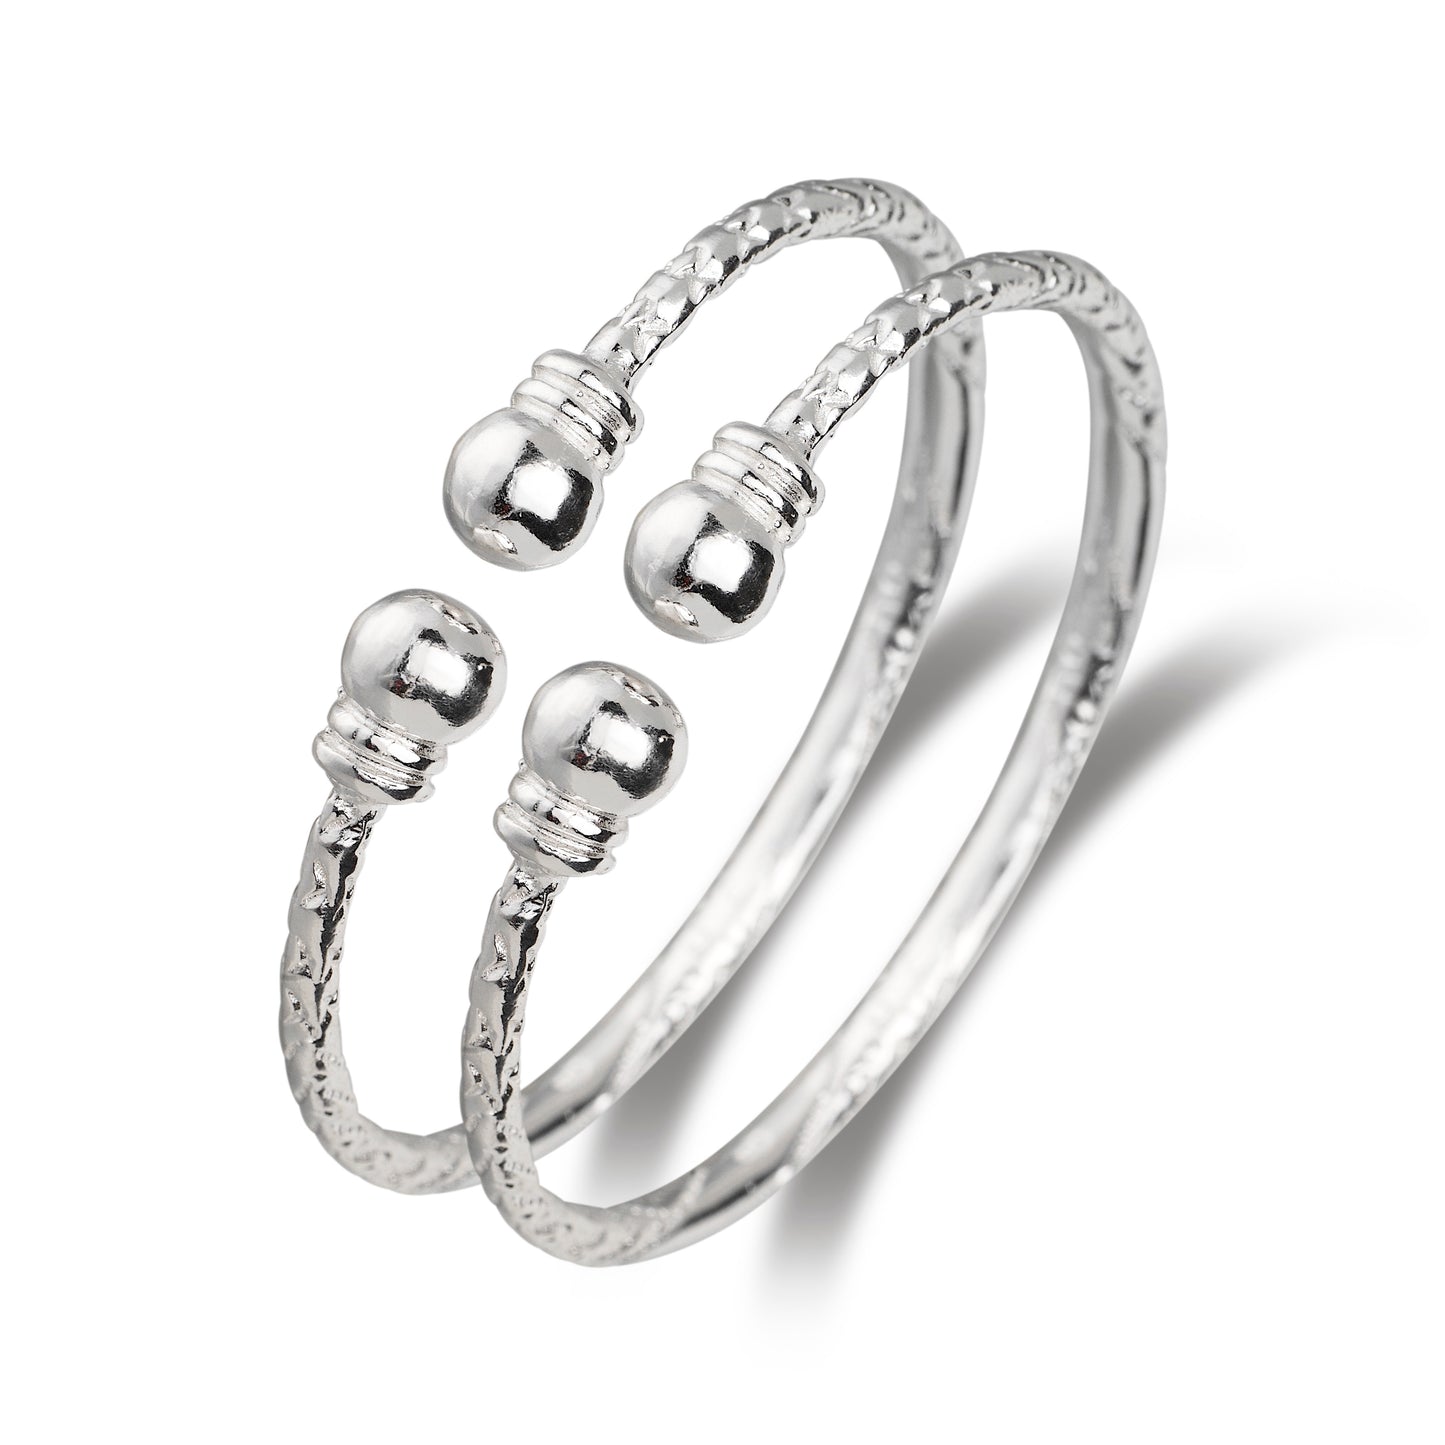 Better Jewelry Ball w. Double Halo Ends .925 Sterling Silver West Indian Baby Bangles (Pair)